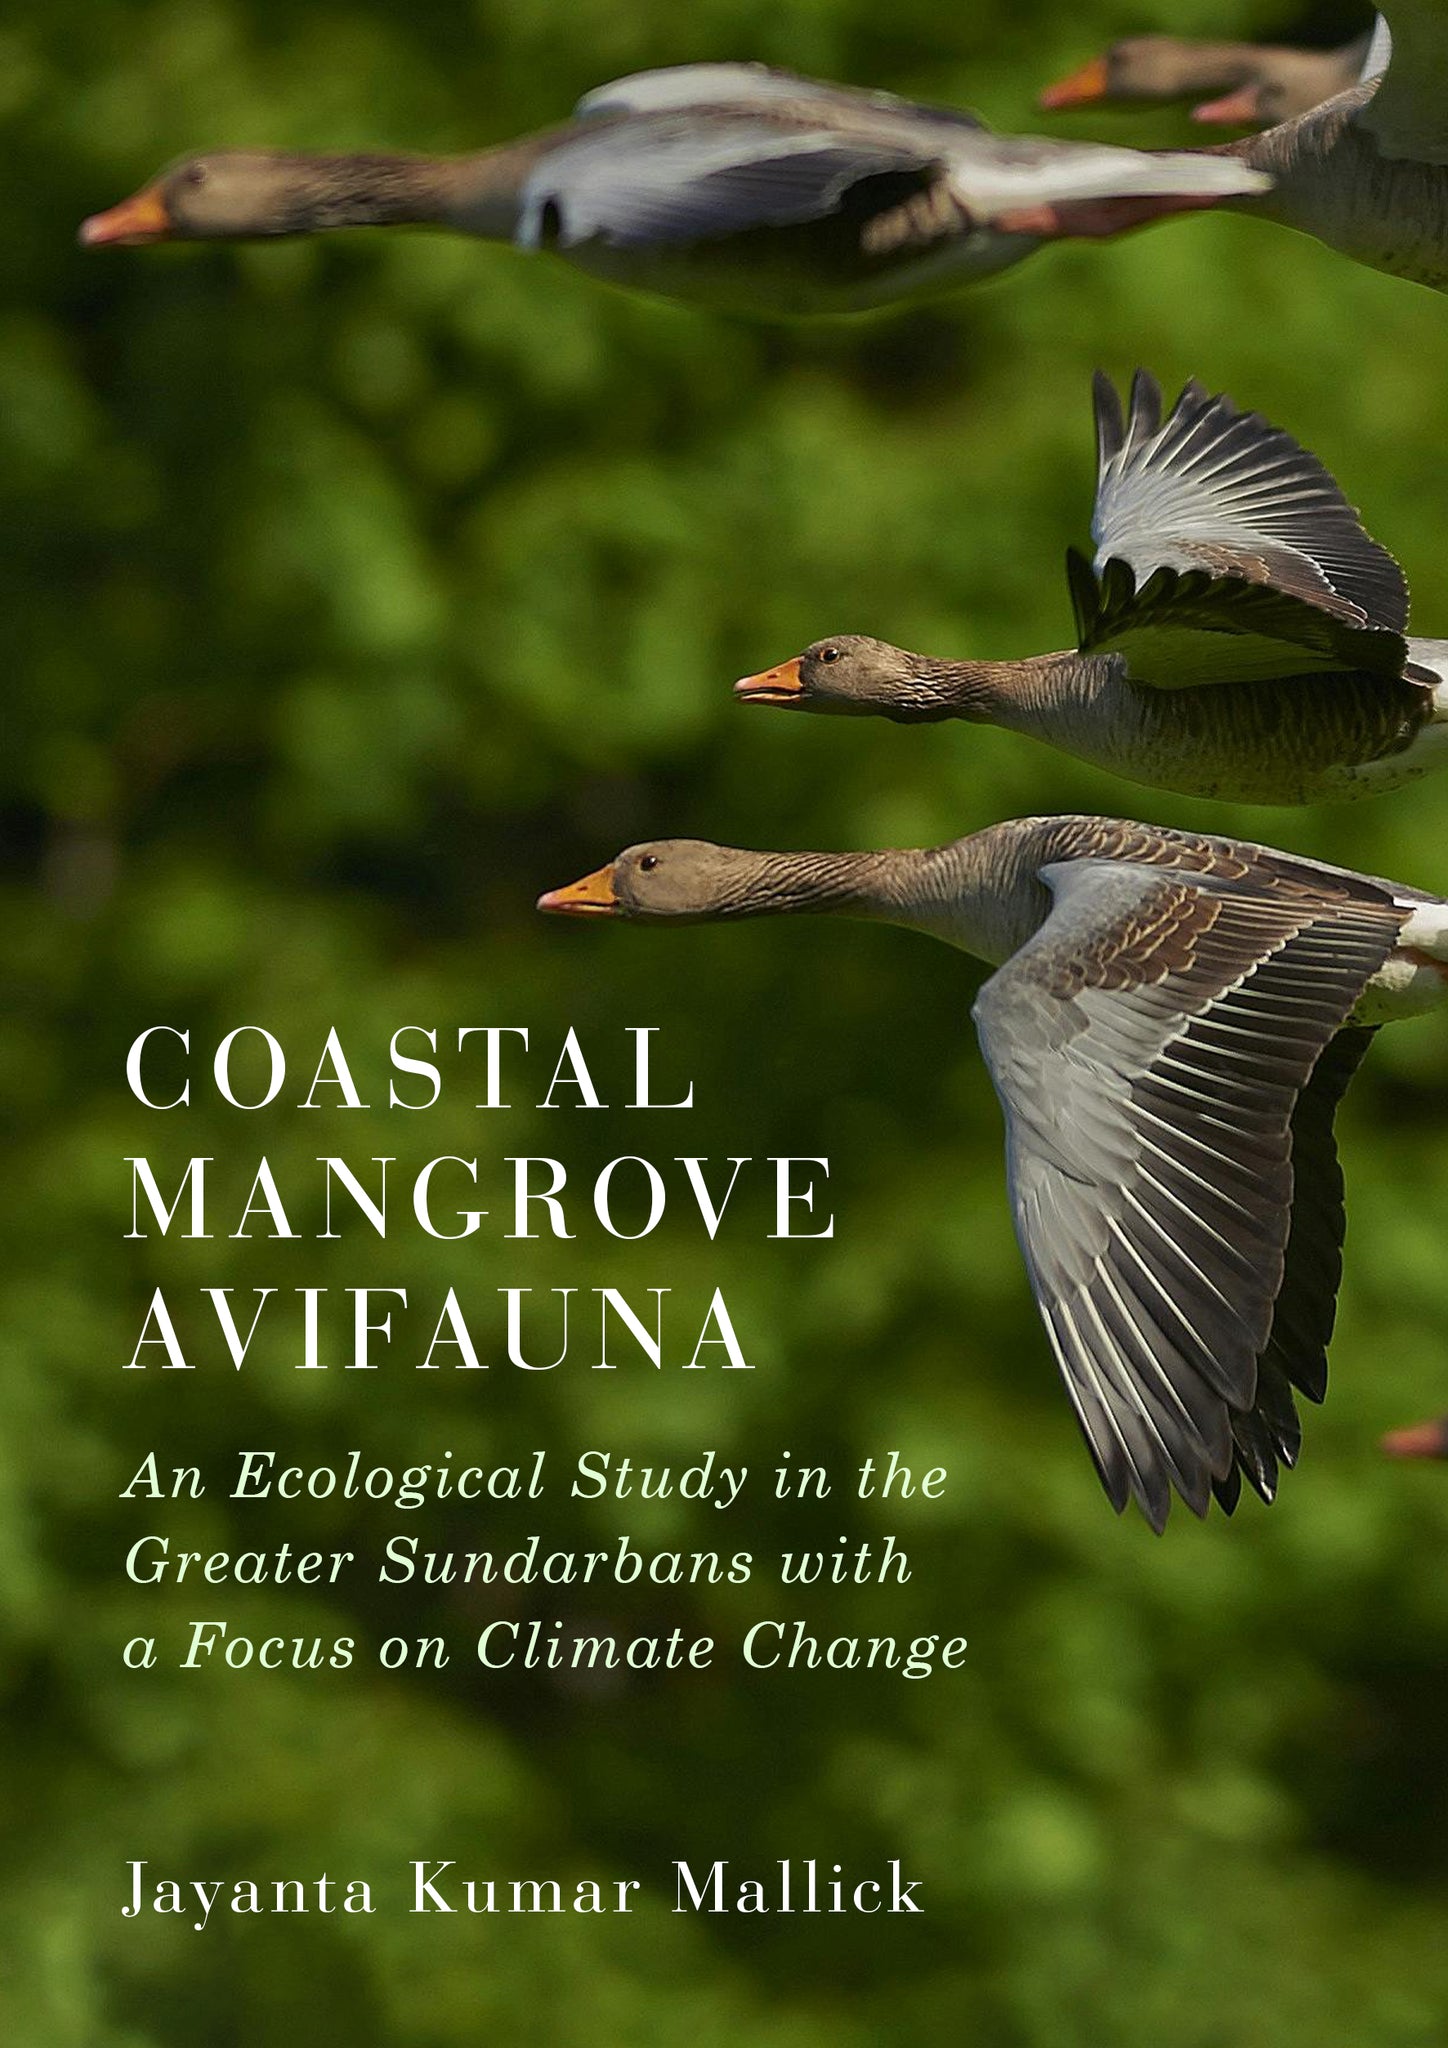 Coastal Mangrove Avifauna: An Ecological Study in the Greater Sundarbans with a Focus on Climate Change